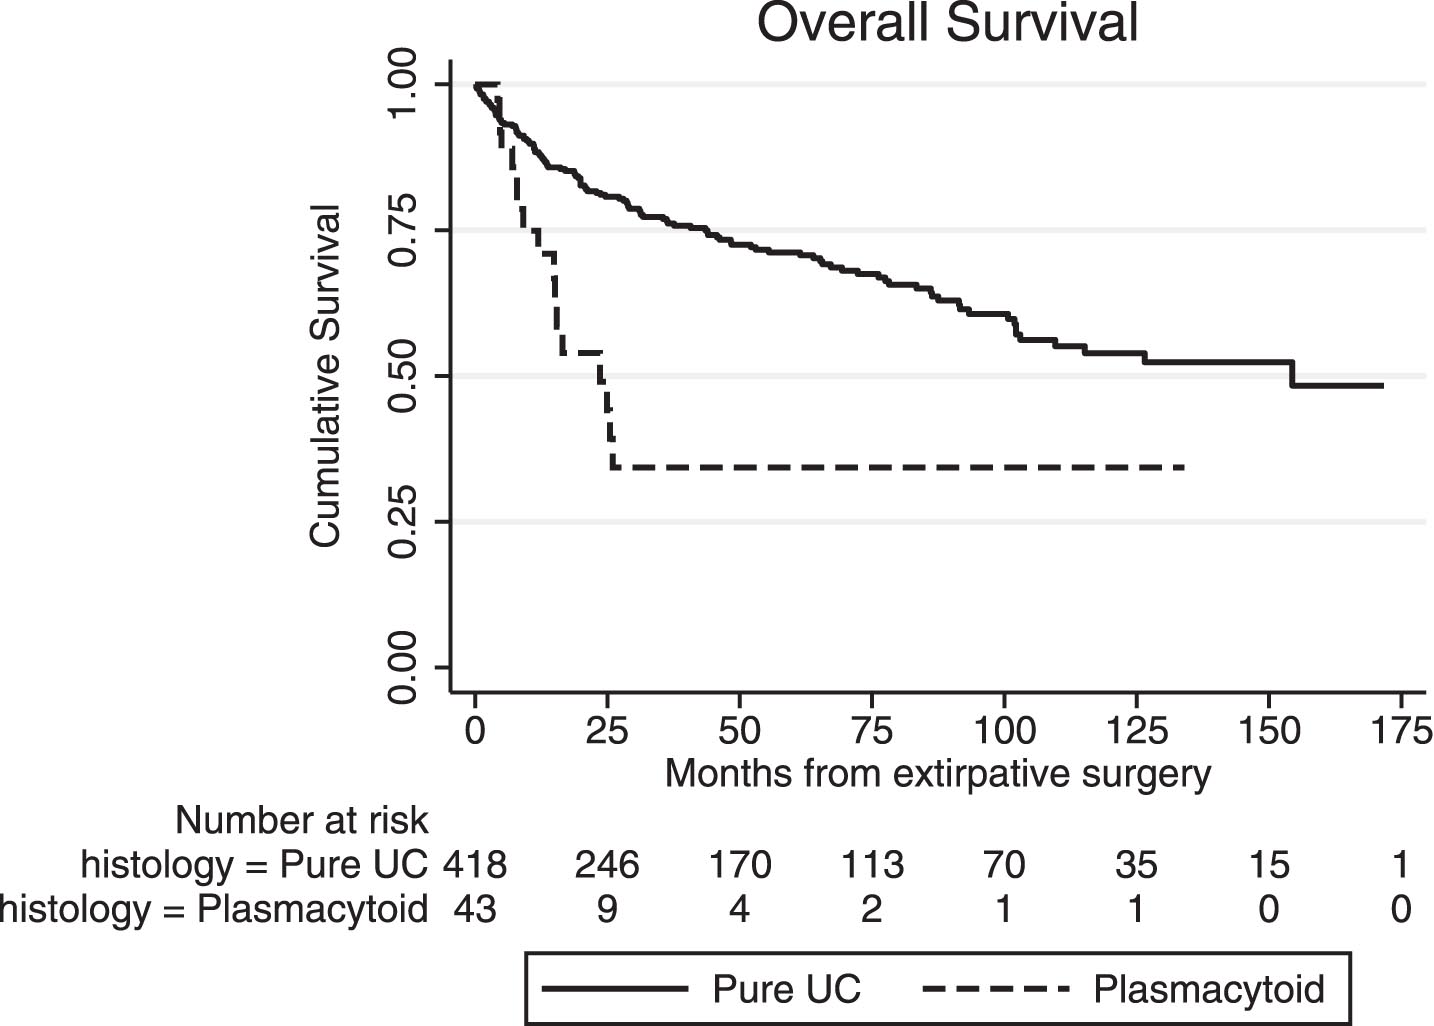 Overall survival (OS) from the time of extirpative surgery for conventional (pure) urothelial carcinoma (UC) and plasmacytoid UC (PUC).